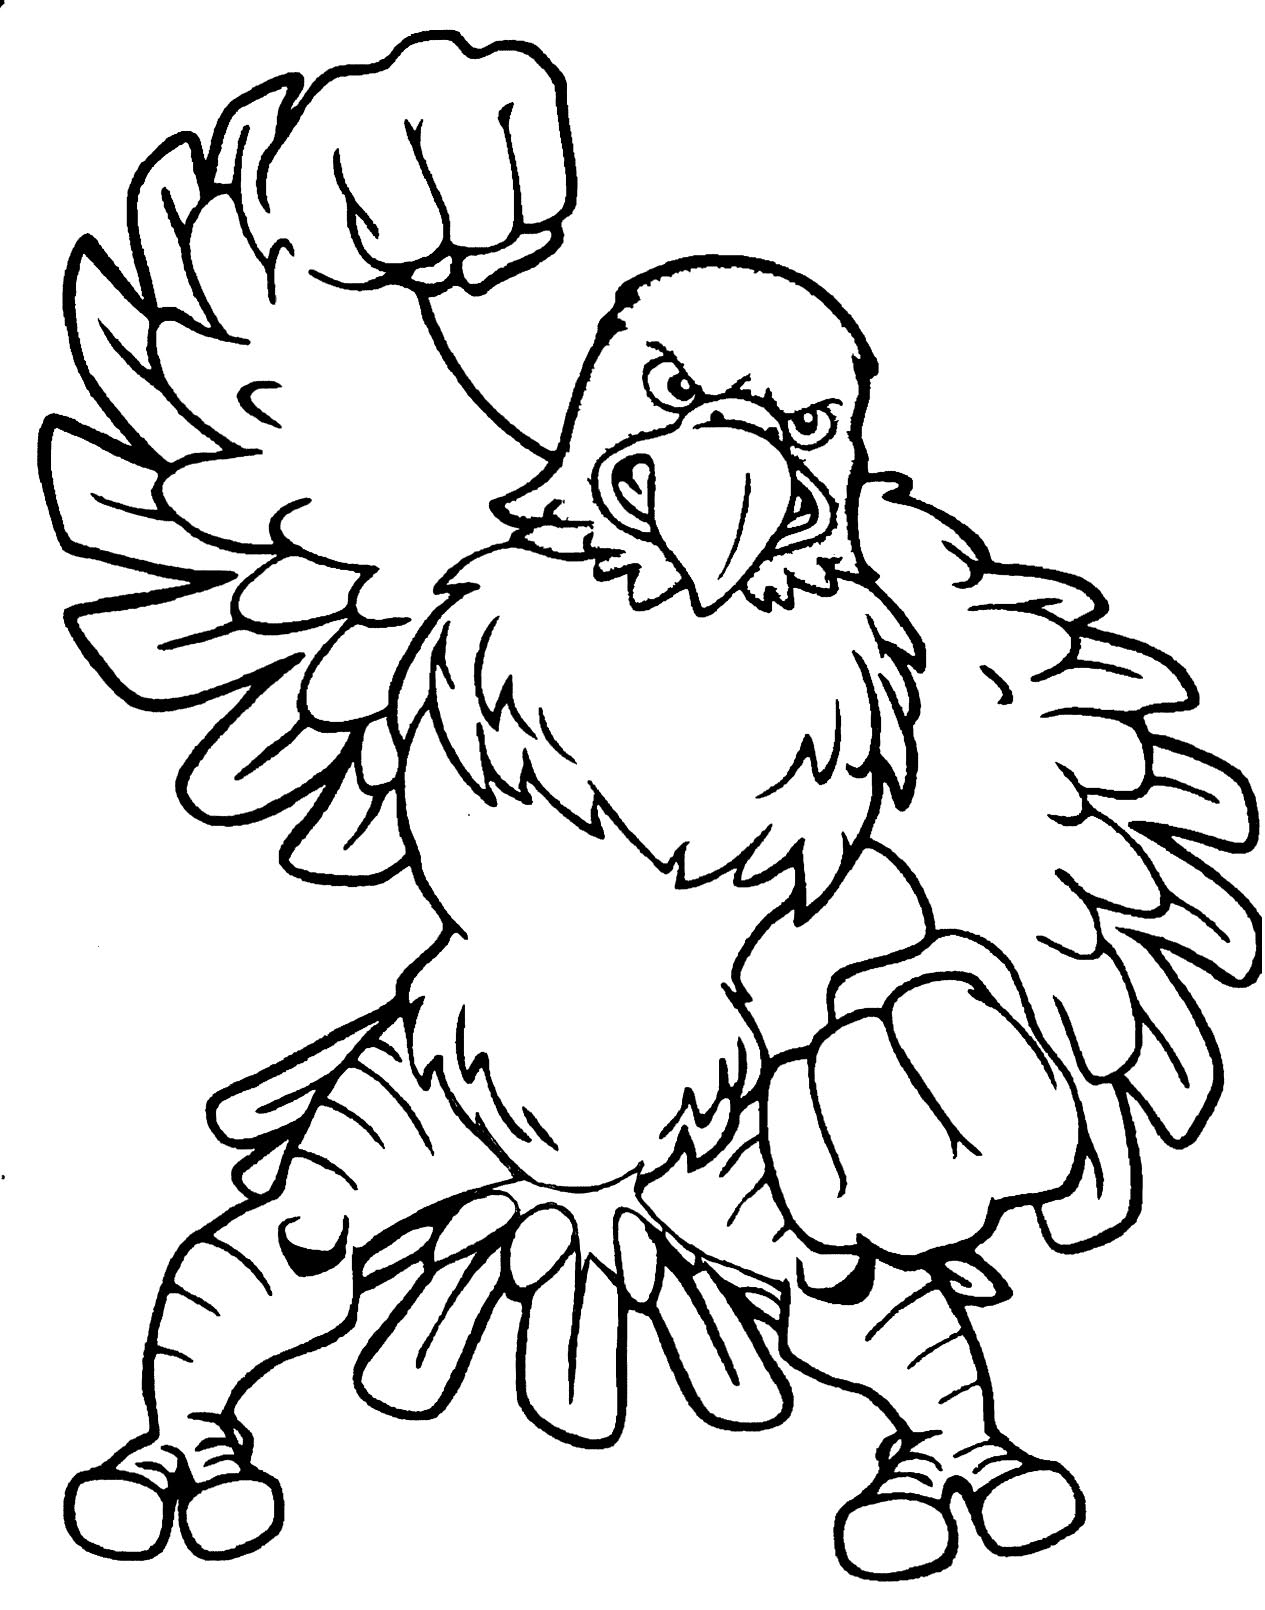 Eagle Mascot Clipart Free Cliparts That You Can Download To You